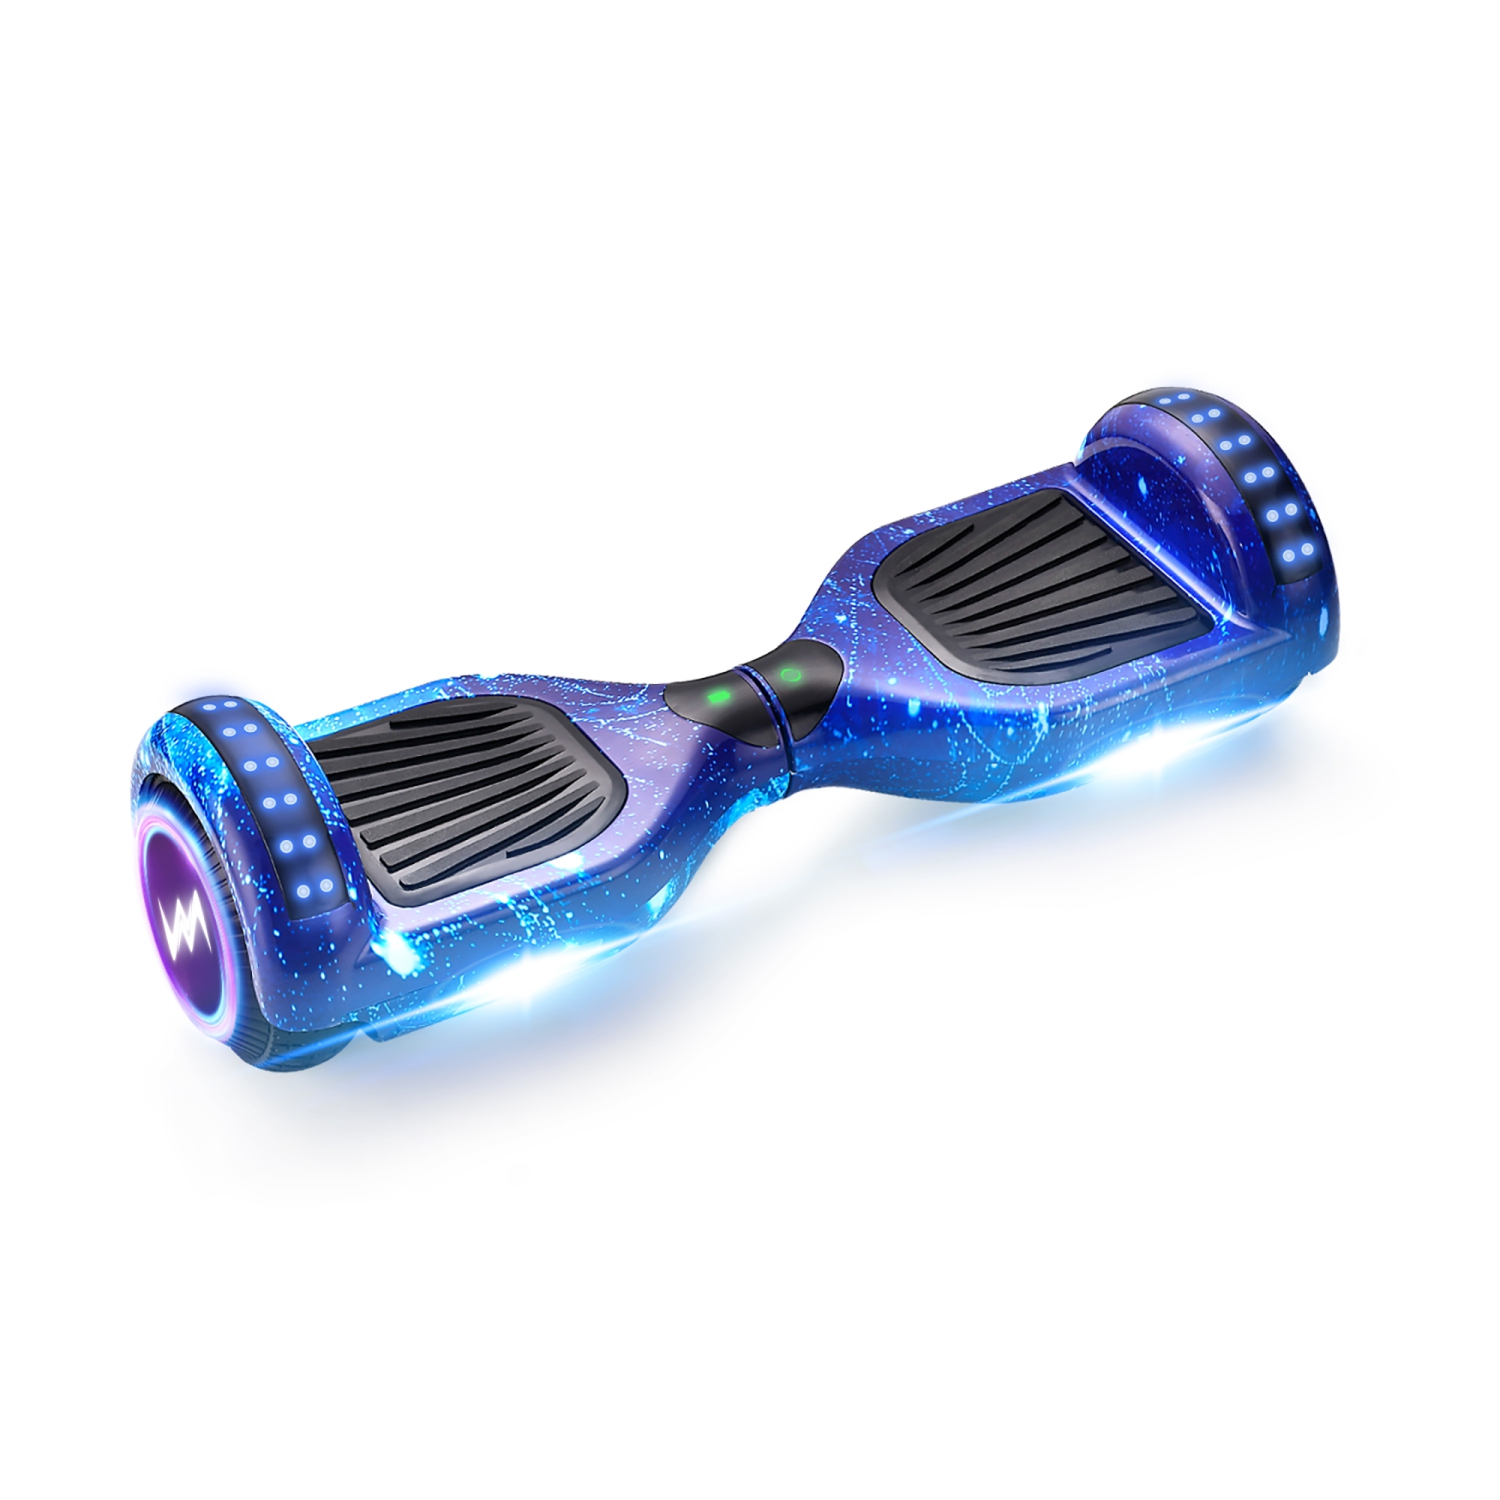 WEELMOTION Galaxy Blue Hoverboard with Music Speaker and LED Front, Strap Lights & Shining Wheels All Terrain 6.5" UL 2272 Certified Hoverboard with complimentary hover board bag